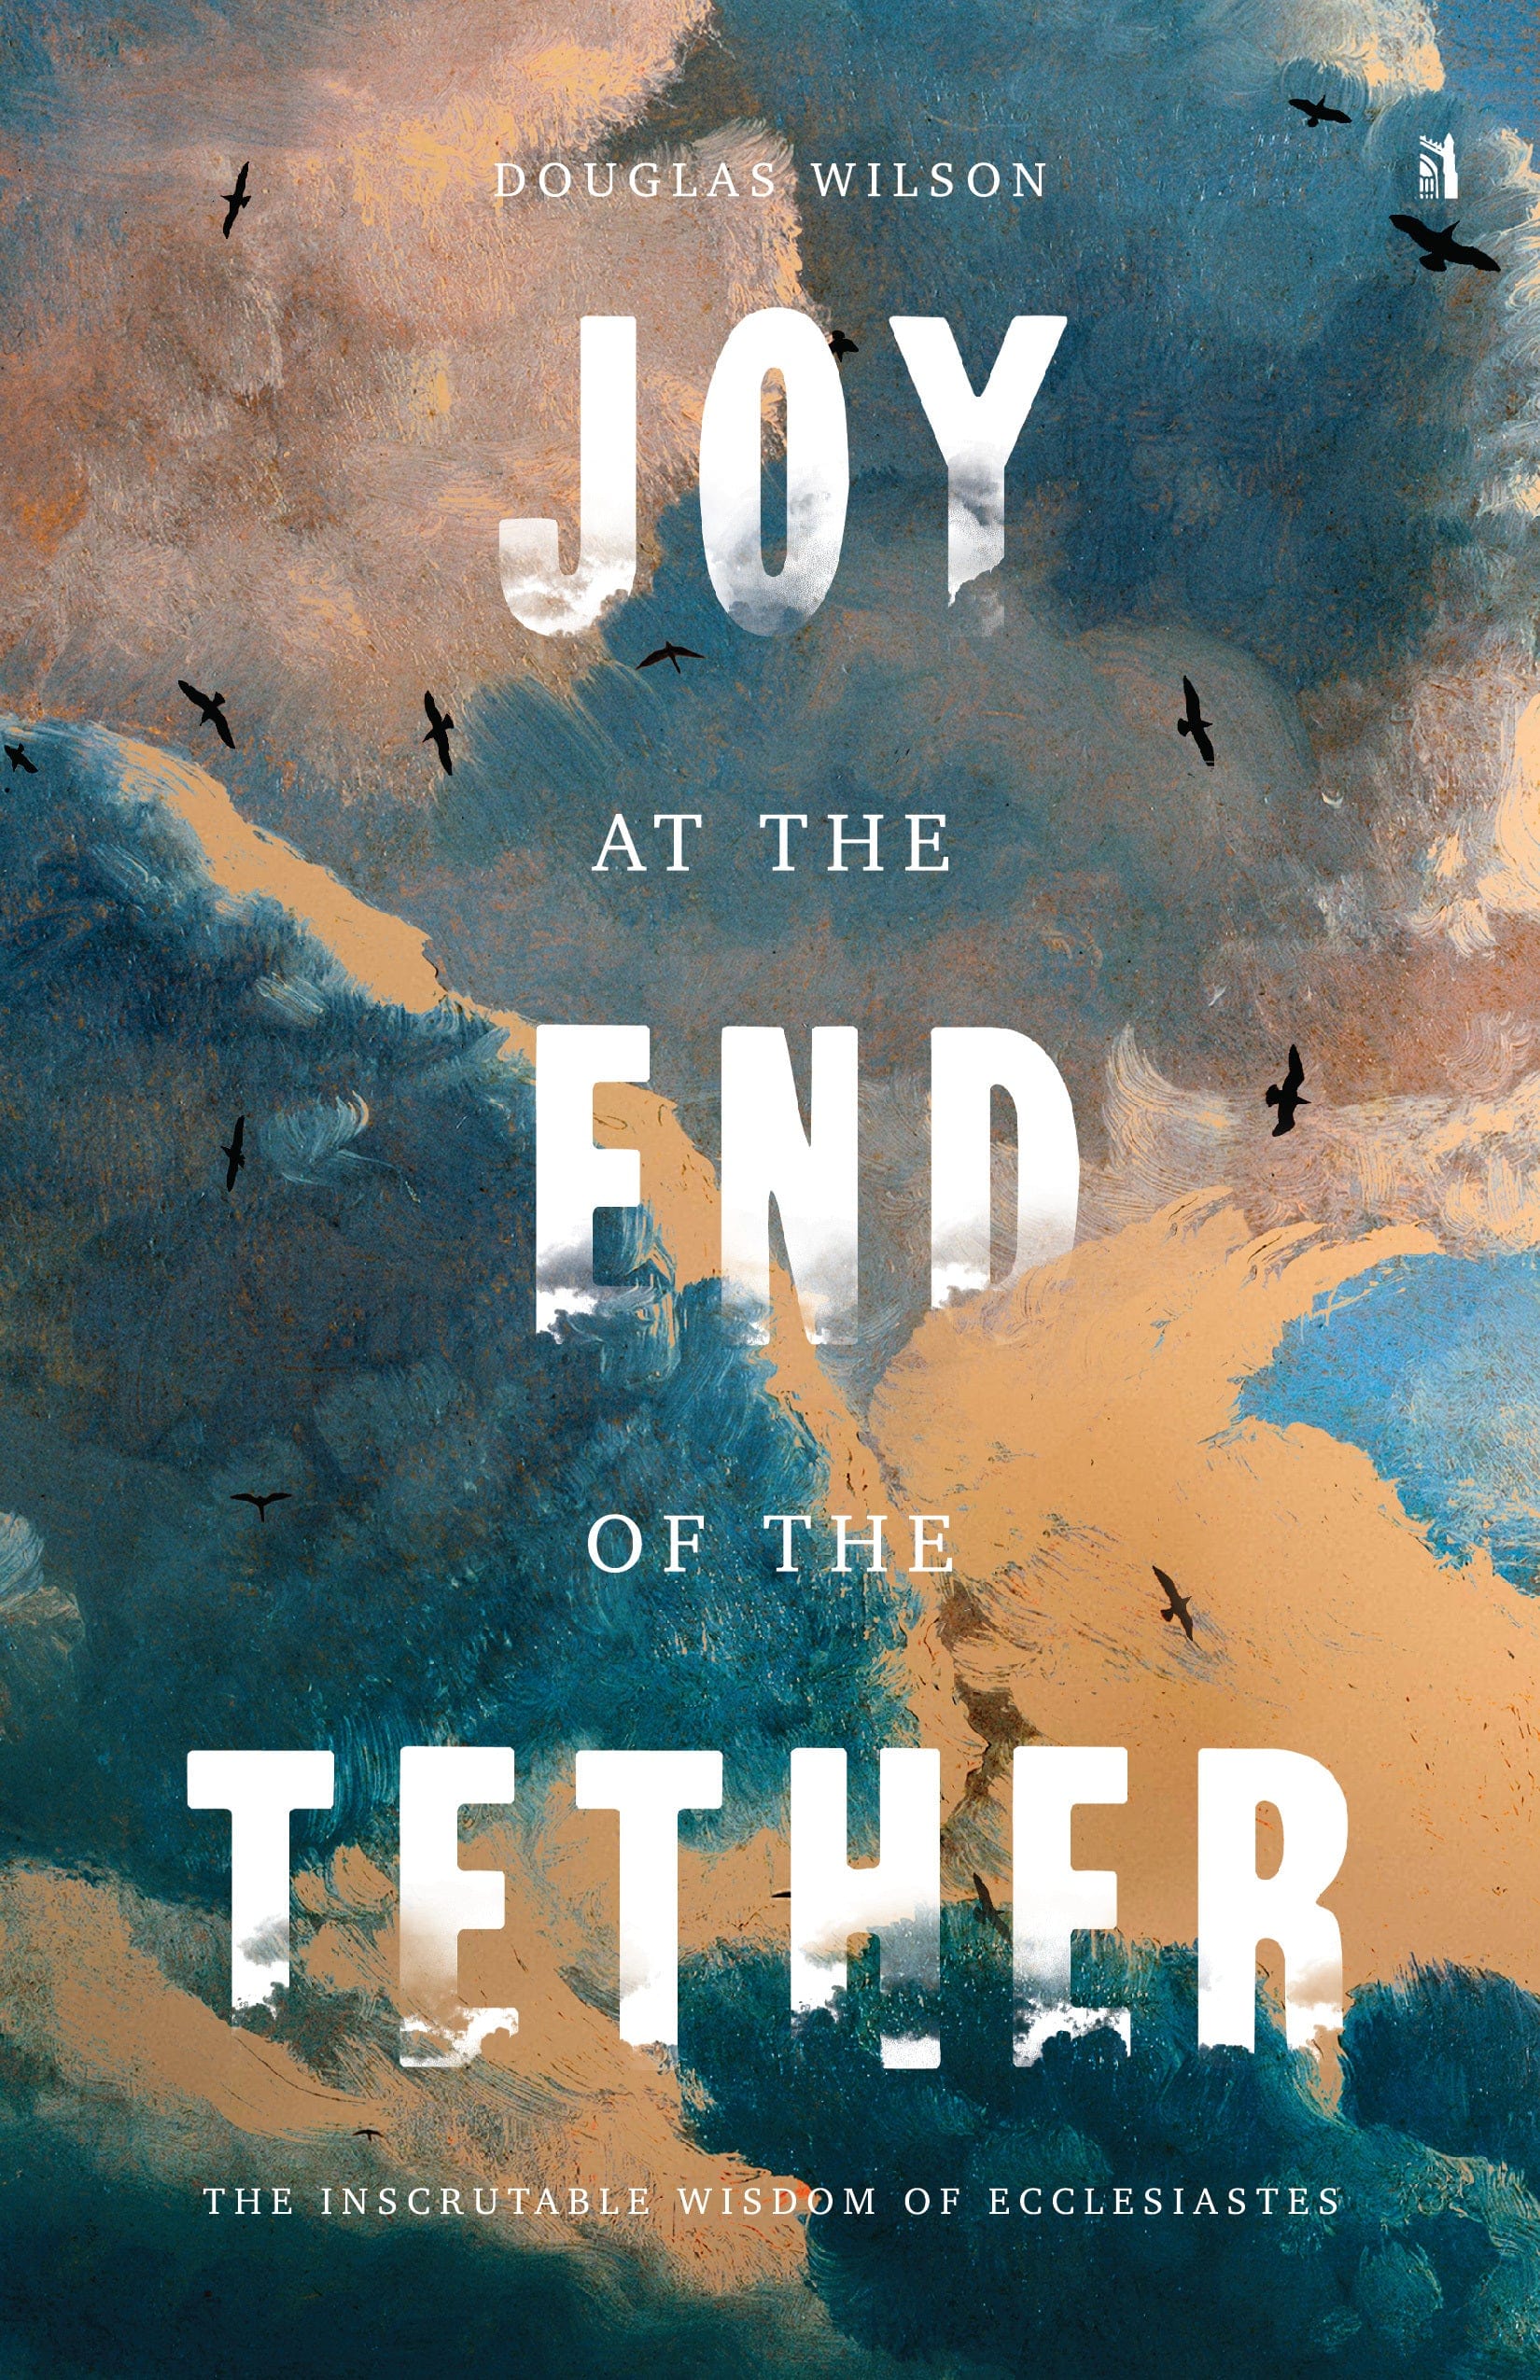 Joy at the End of the Tether: The Inscrutable Wisdom of Ecclesiastes